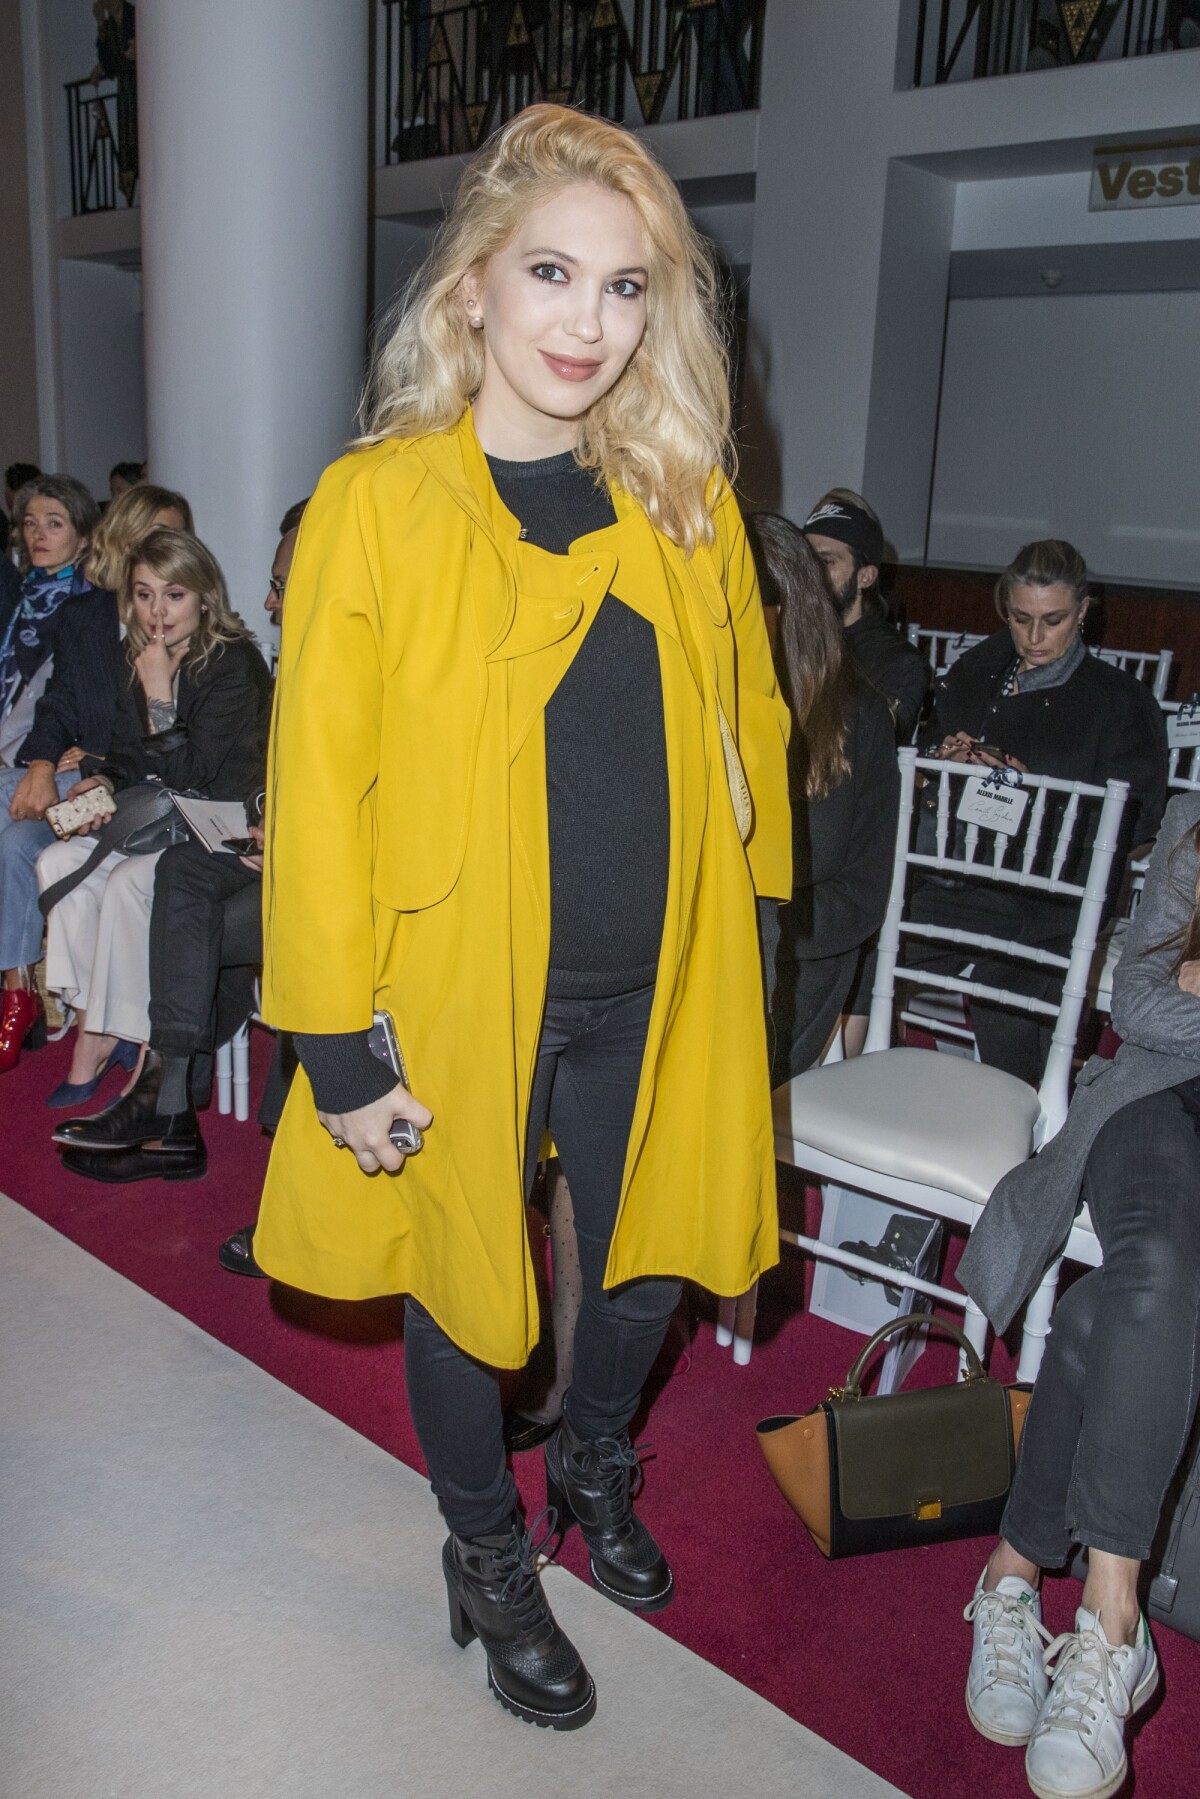 Camille Seydoux (pregnant) attending the Alexis Mabille show